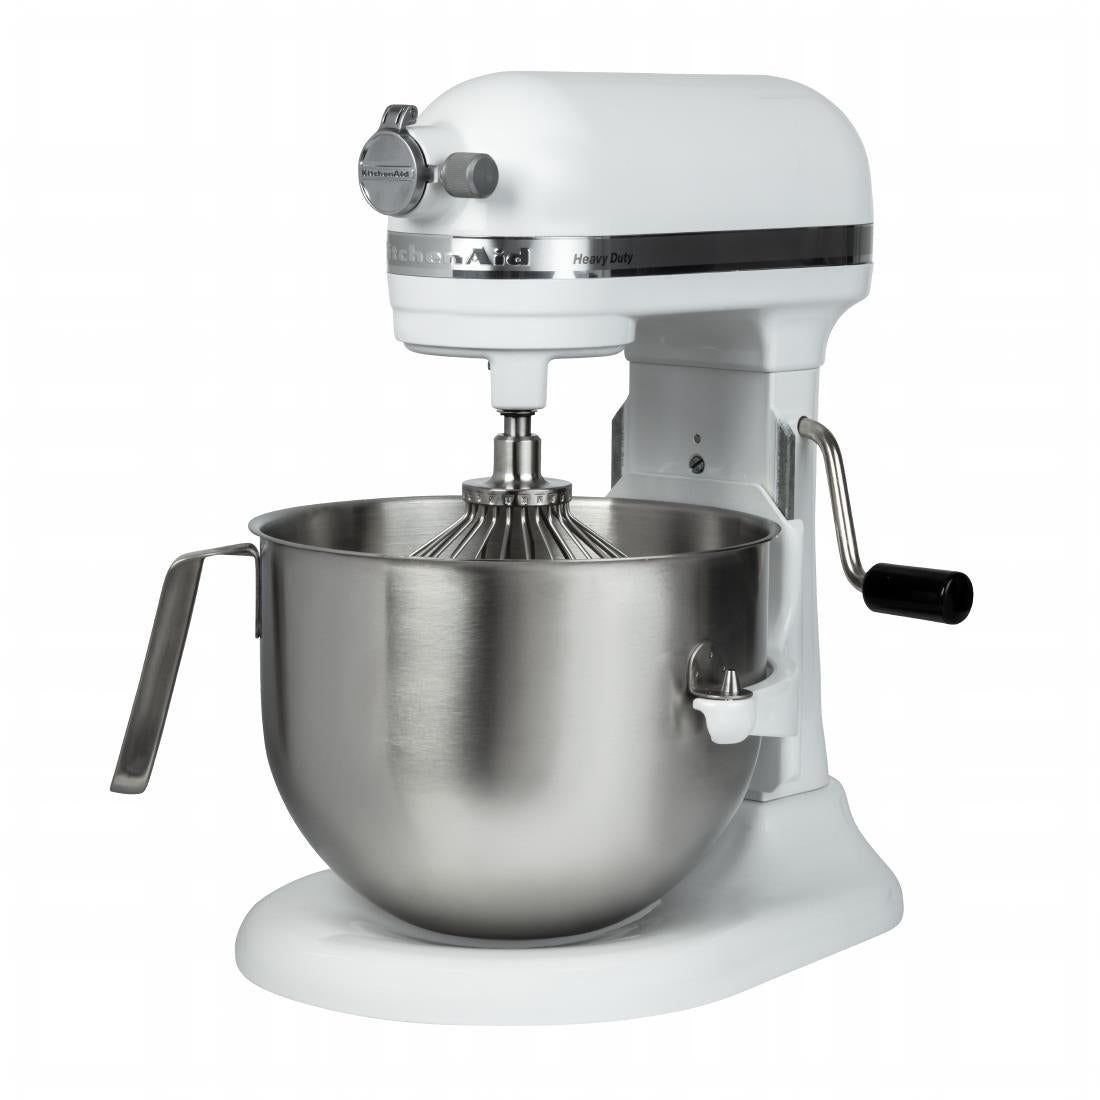 KitchenAid Heavy Duty Stand Mixer 5KSM7591XBWH JD Catering Equipment Solutions Ltd